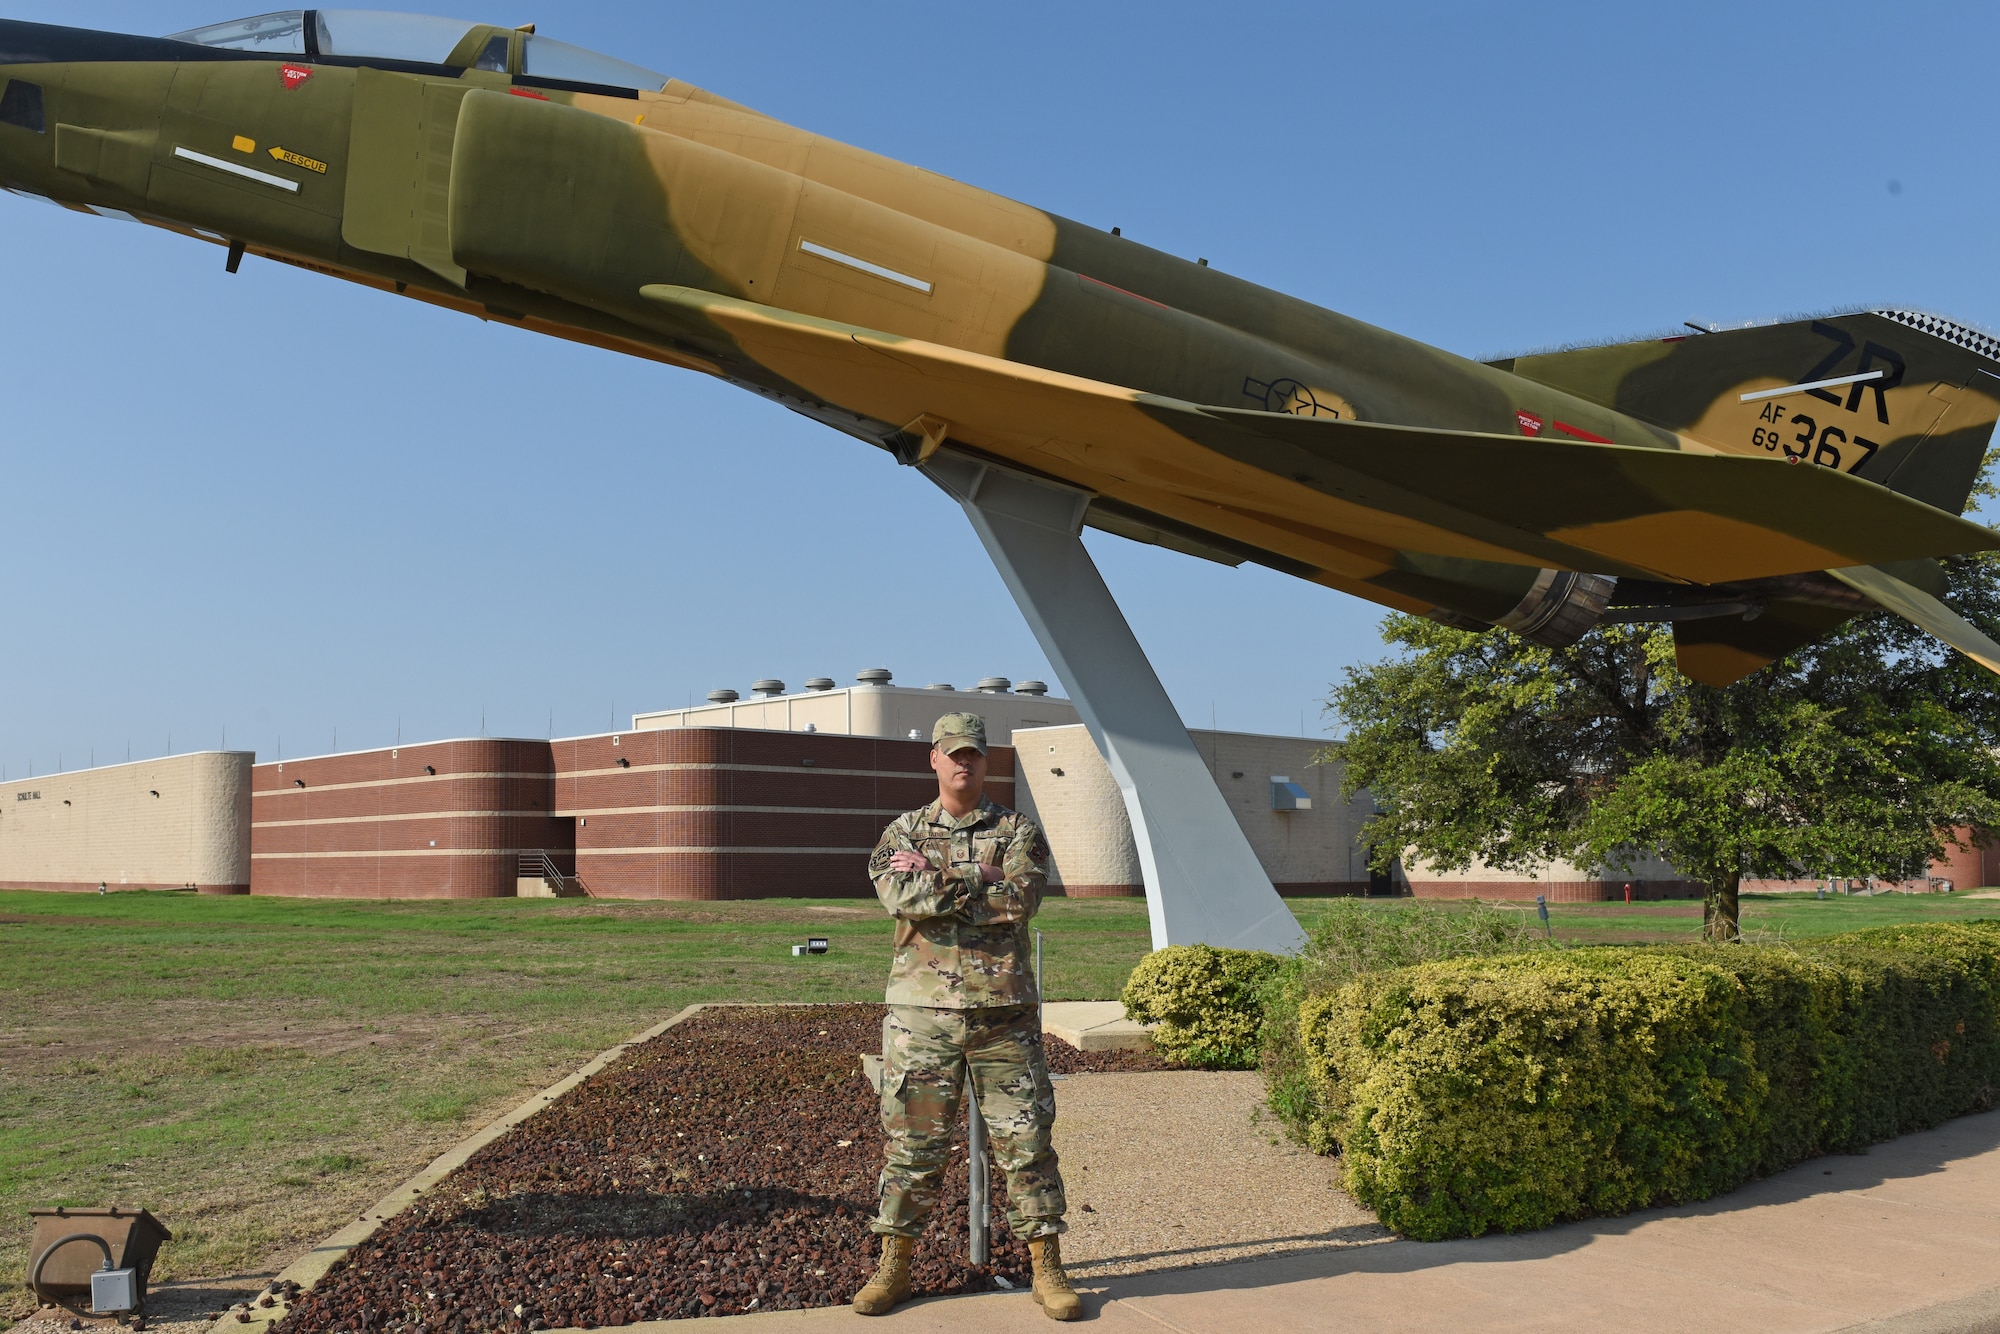 U.S. Air Force Master Sgt. Mickey Bretado, 313th Training Squadron flight chief, poses for a photo next to a RF-4 aircraft static display at Goodfellow Air Force Base, Sept. 12, 2022. The RF-4 was equipped with a variety of film-based and side-looking radar, and it was an unarmed photographic reconnaissance version of the F-4C aircraft. (U.S. Air Force photo by Airman 1st Class Zachary Heimbuch)